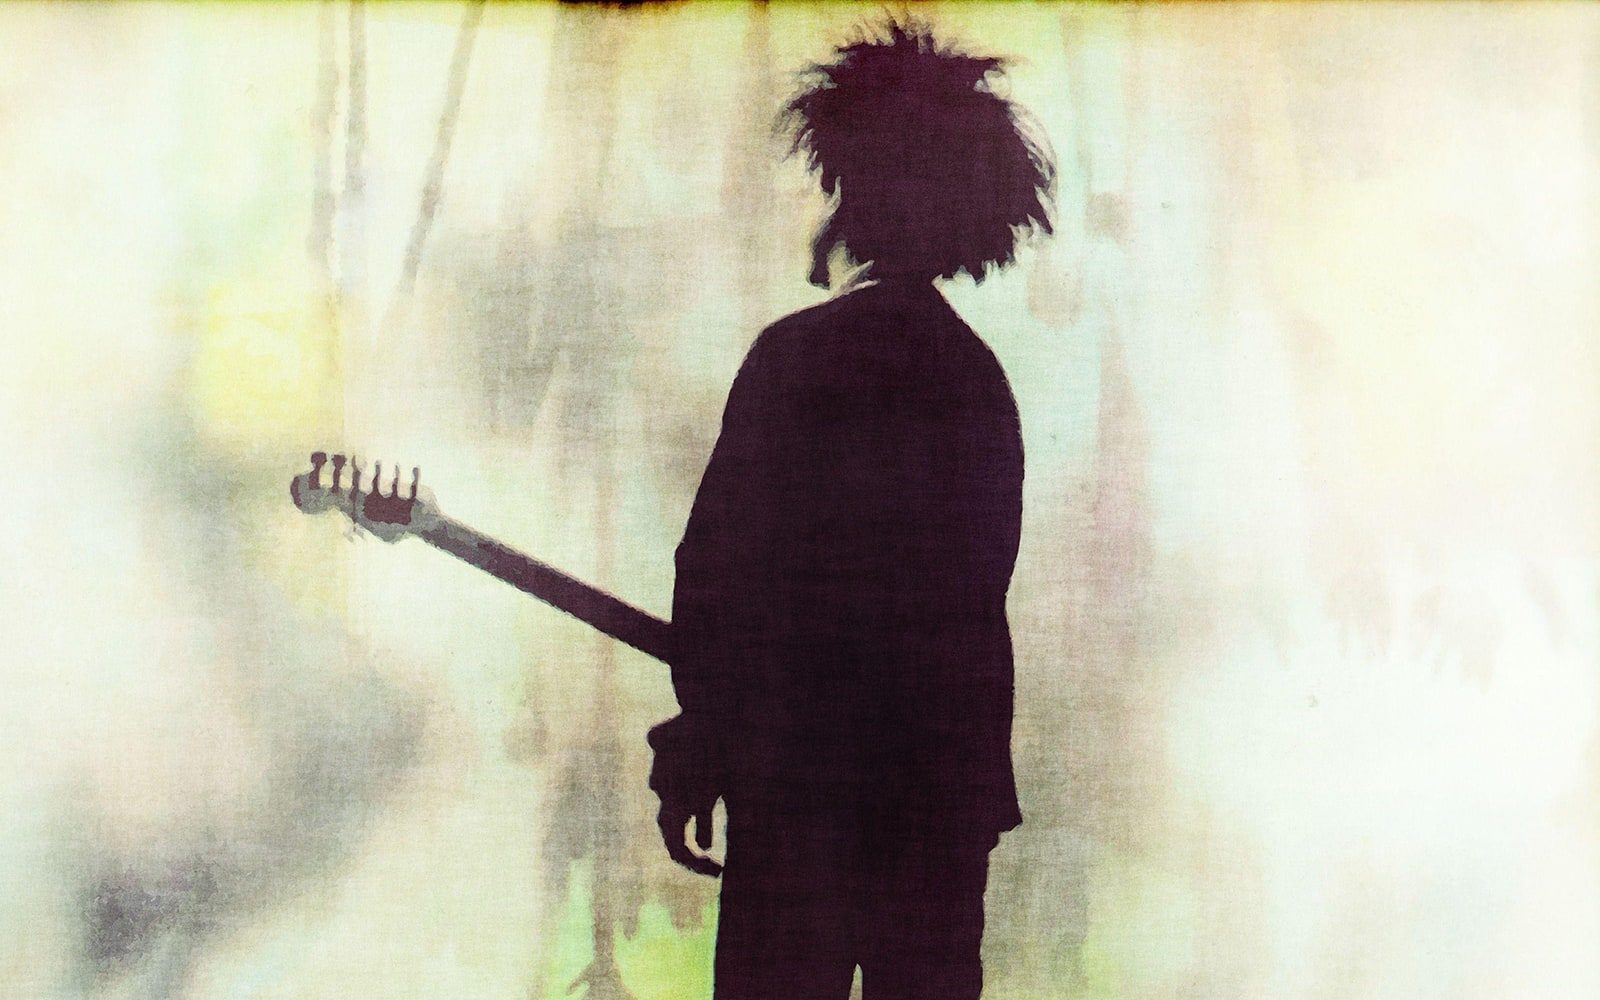 Robert Smith of The Cure, holding a guitar, with his back turned to us